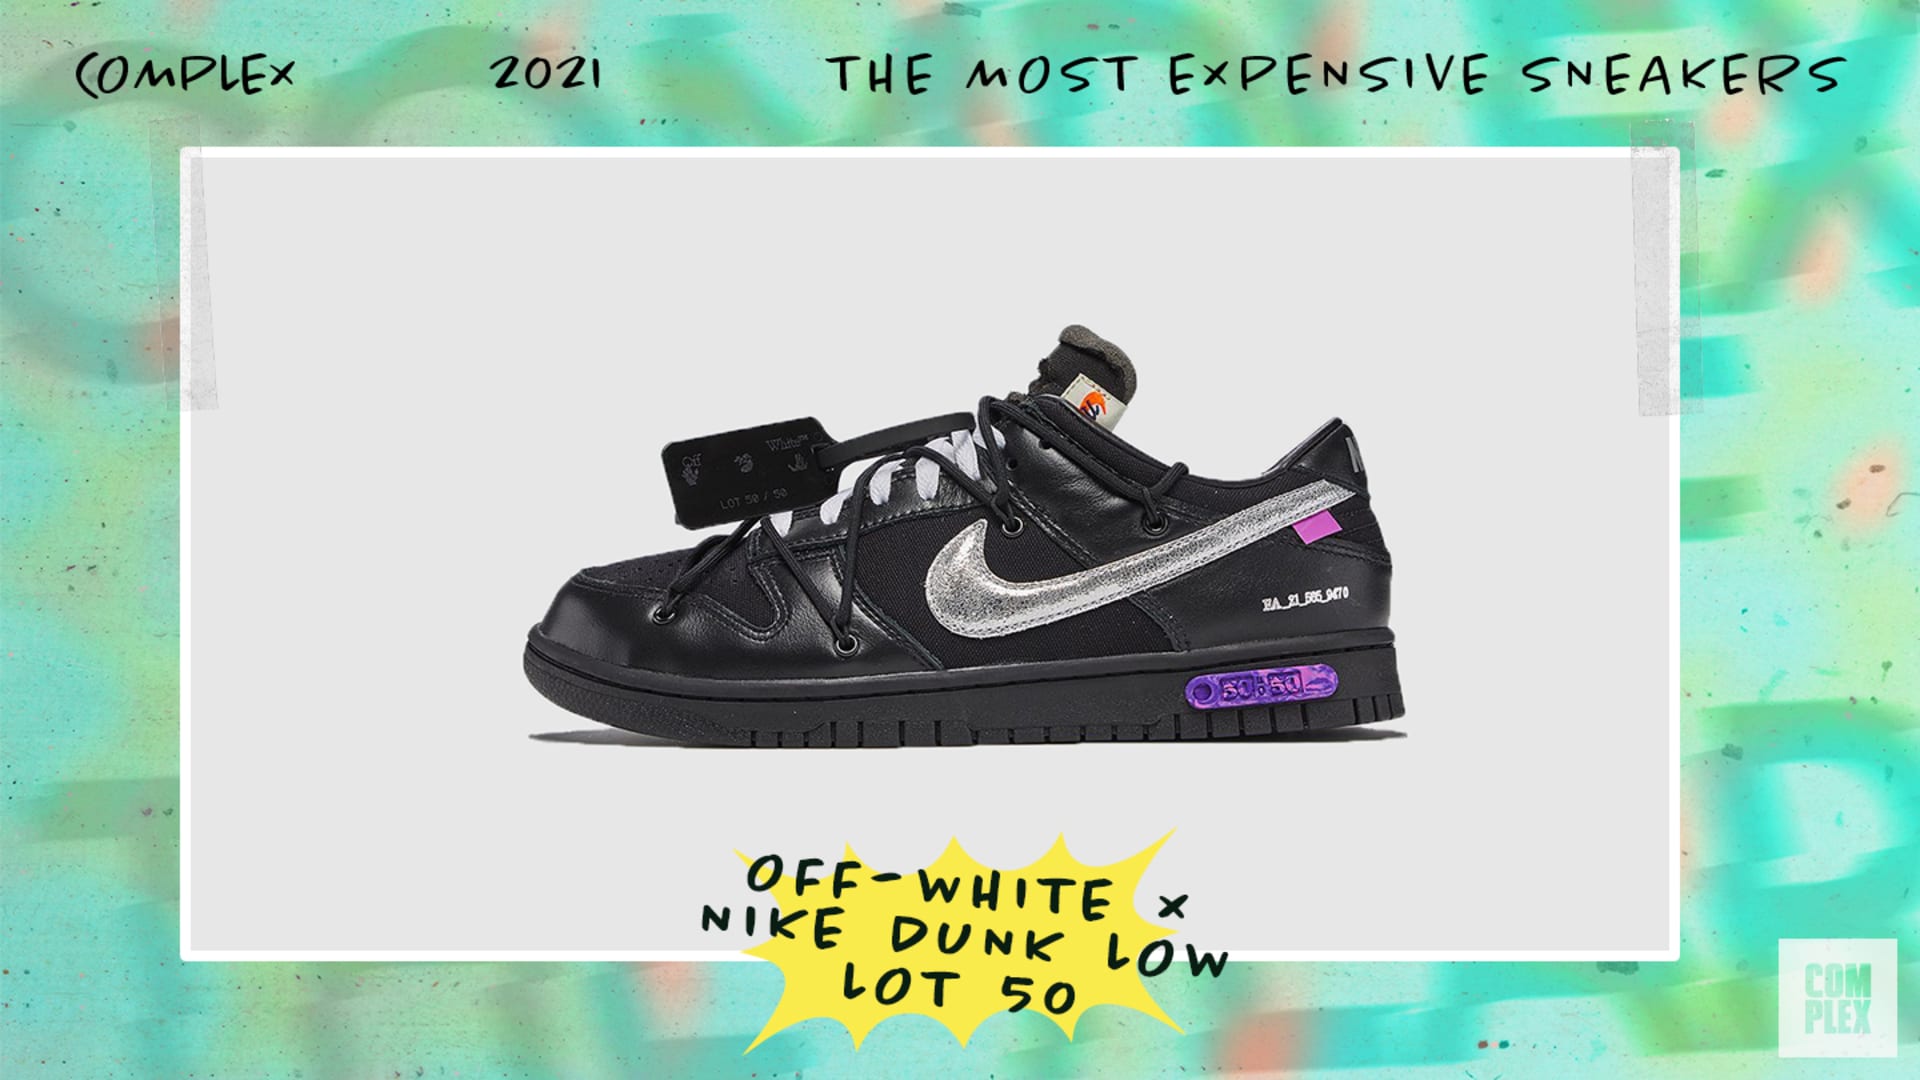 Off White x Nike Dunk Low Lot 50